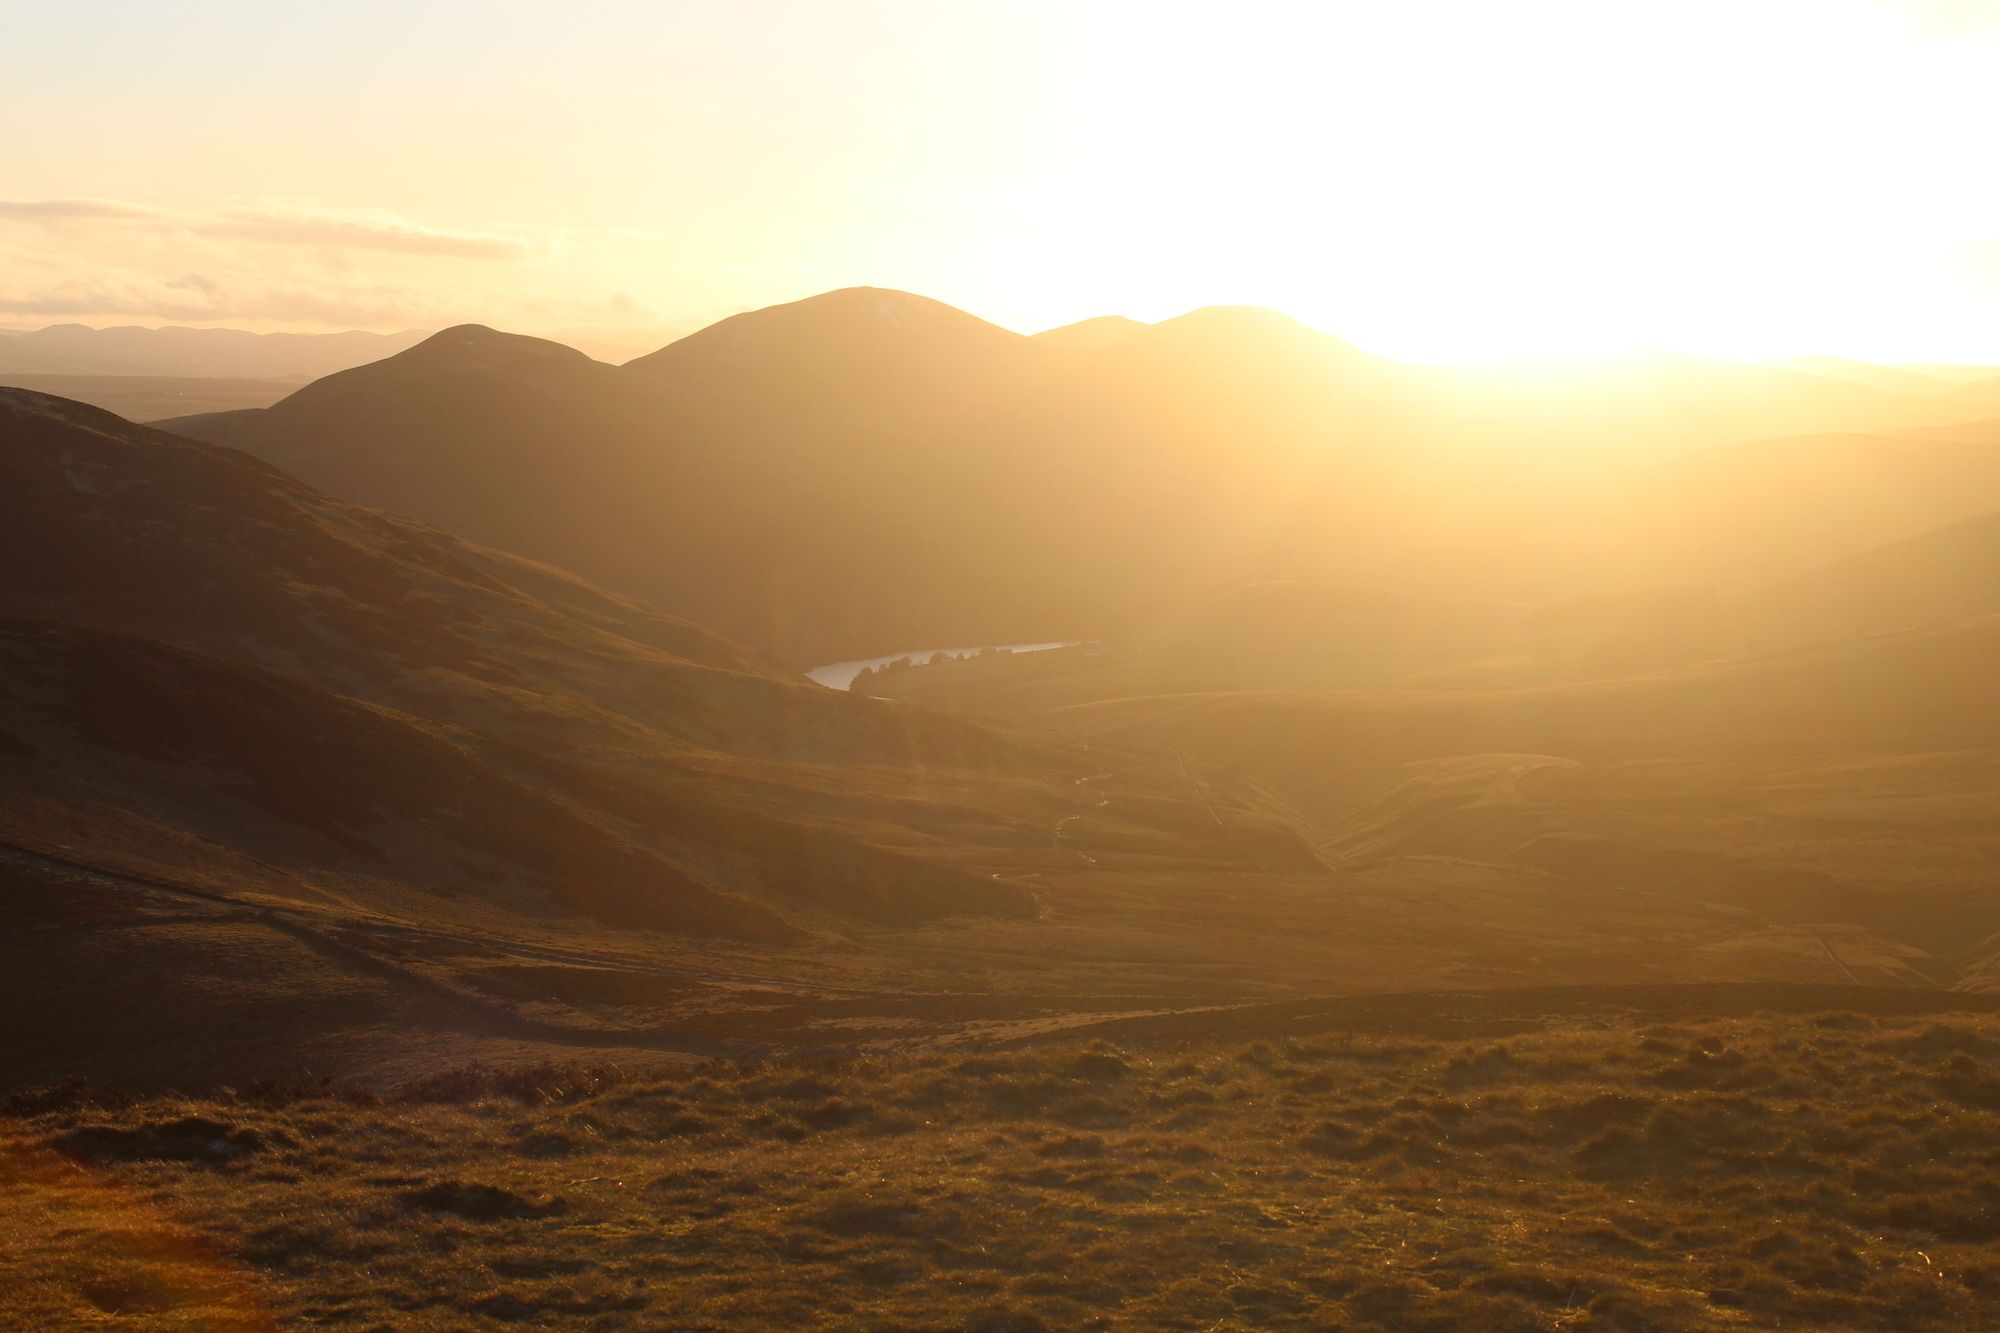 The sunset pictured from Allermuir, looking out over the five peaks of the Pentland Hills. Photo: Stuart Kenny